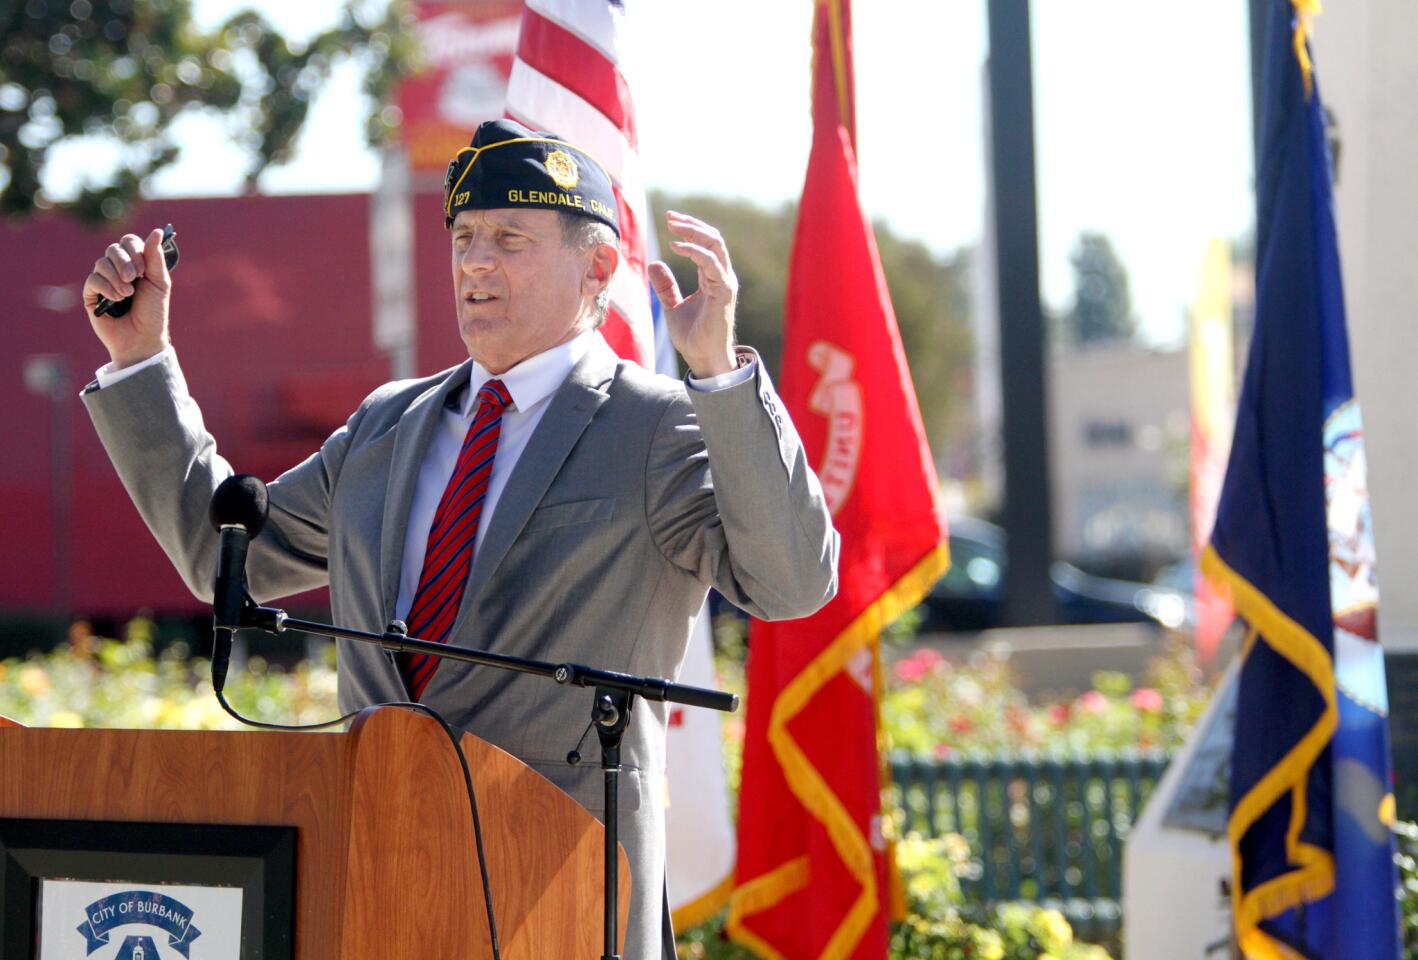 Major General Mark MacCarley, U.S. Army, Ret., was the guest speaker at the annual Veterans Day Ceremony at McCambridge Park War Memorial in Burbank on Wednesday, November 11, 2015.